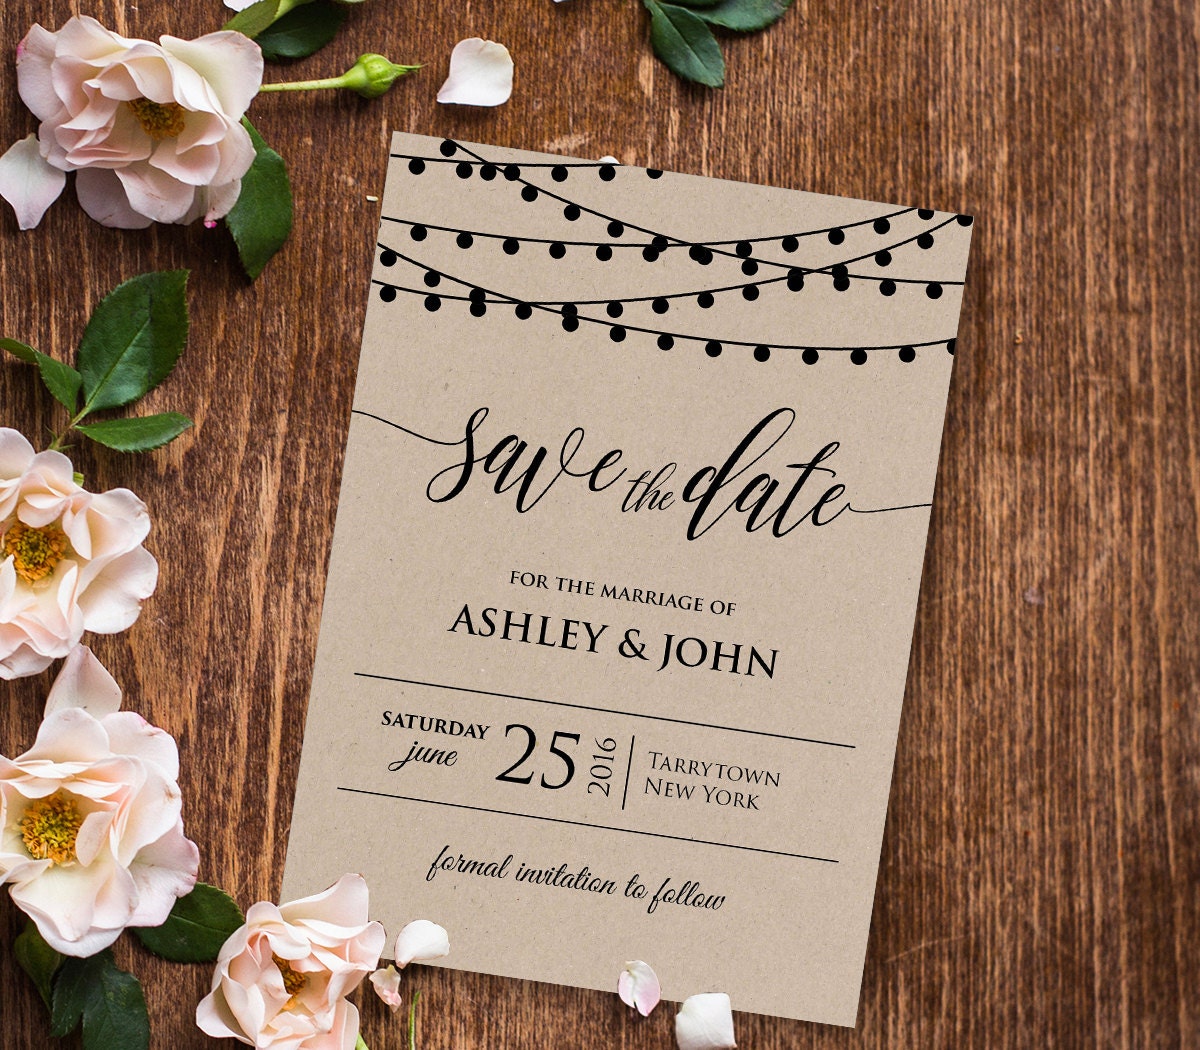 the wedding date review book